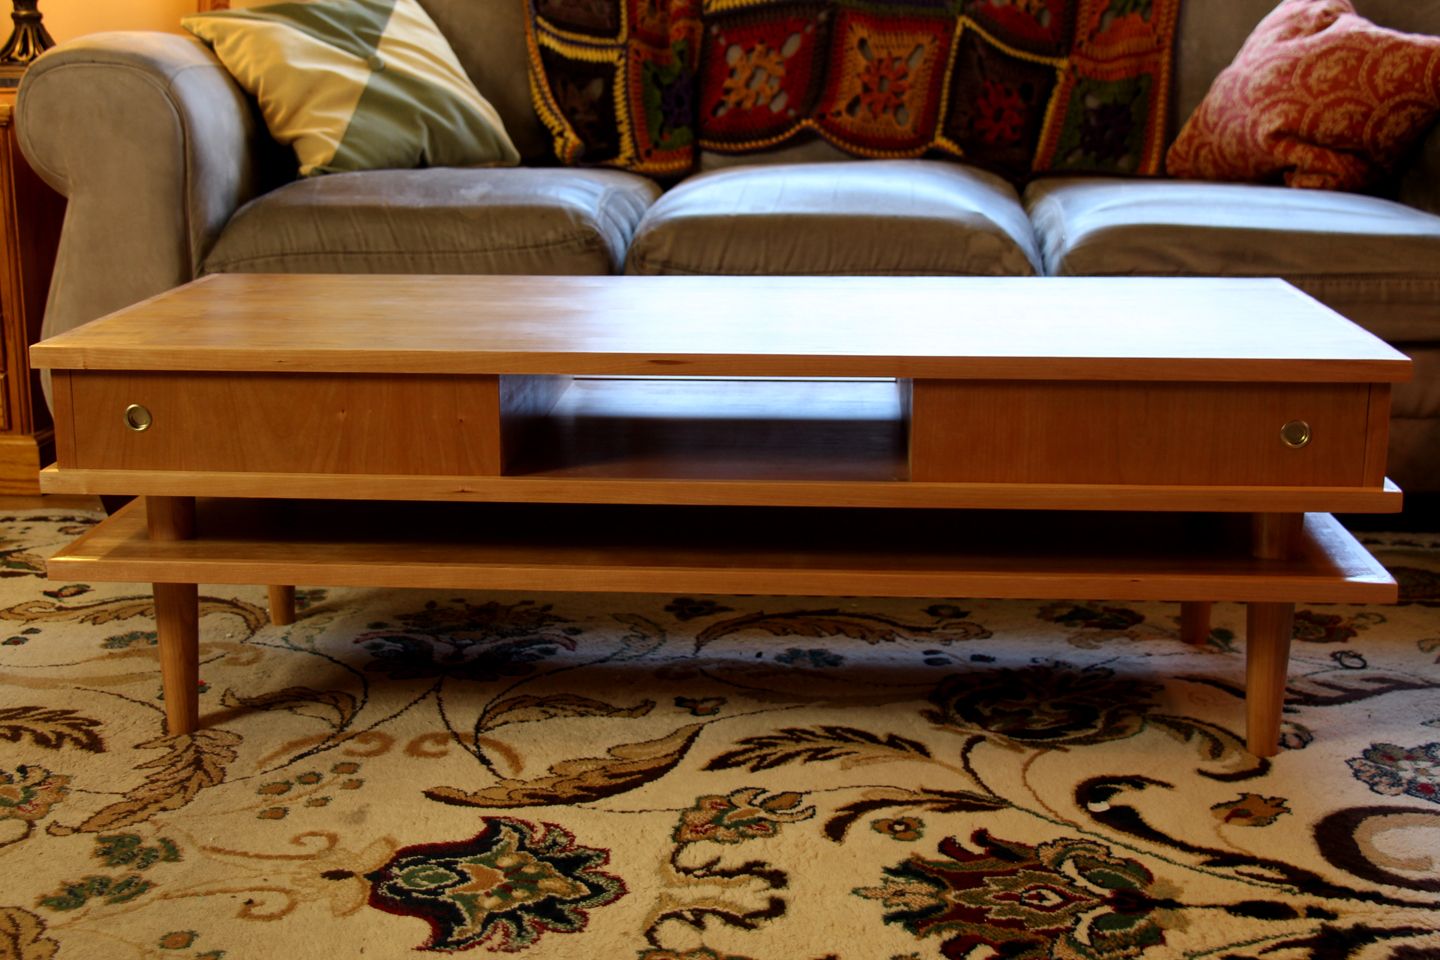 Build a coffee table | Woodworking for Mere Mortals